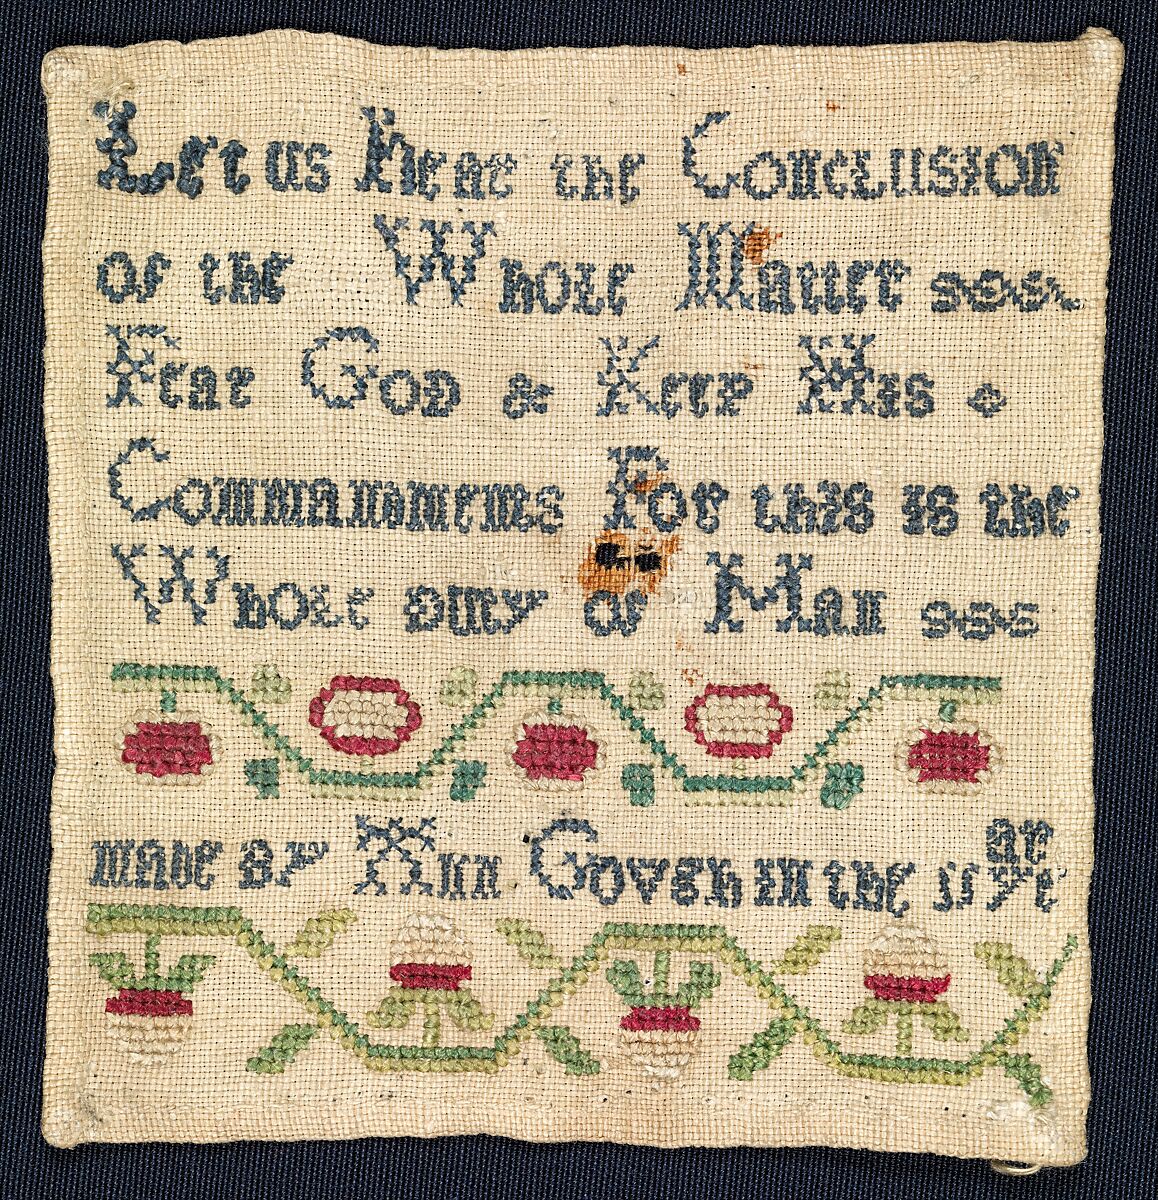 Sampler made at a charity school, Silk embroidery on linen, British 